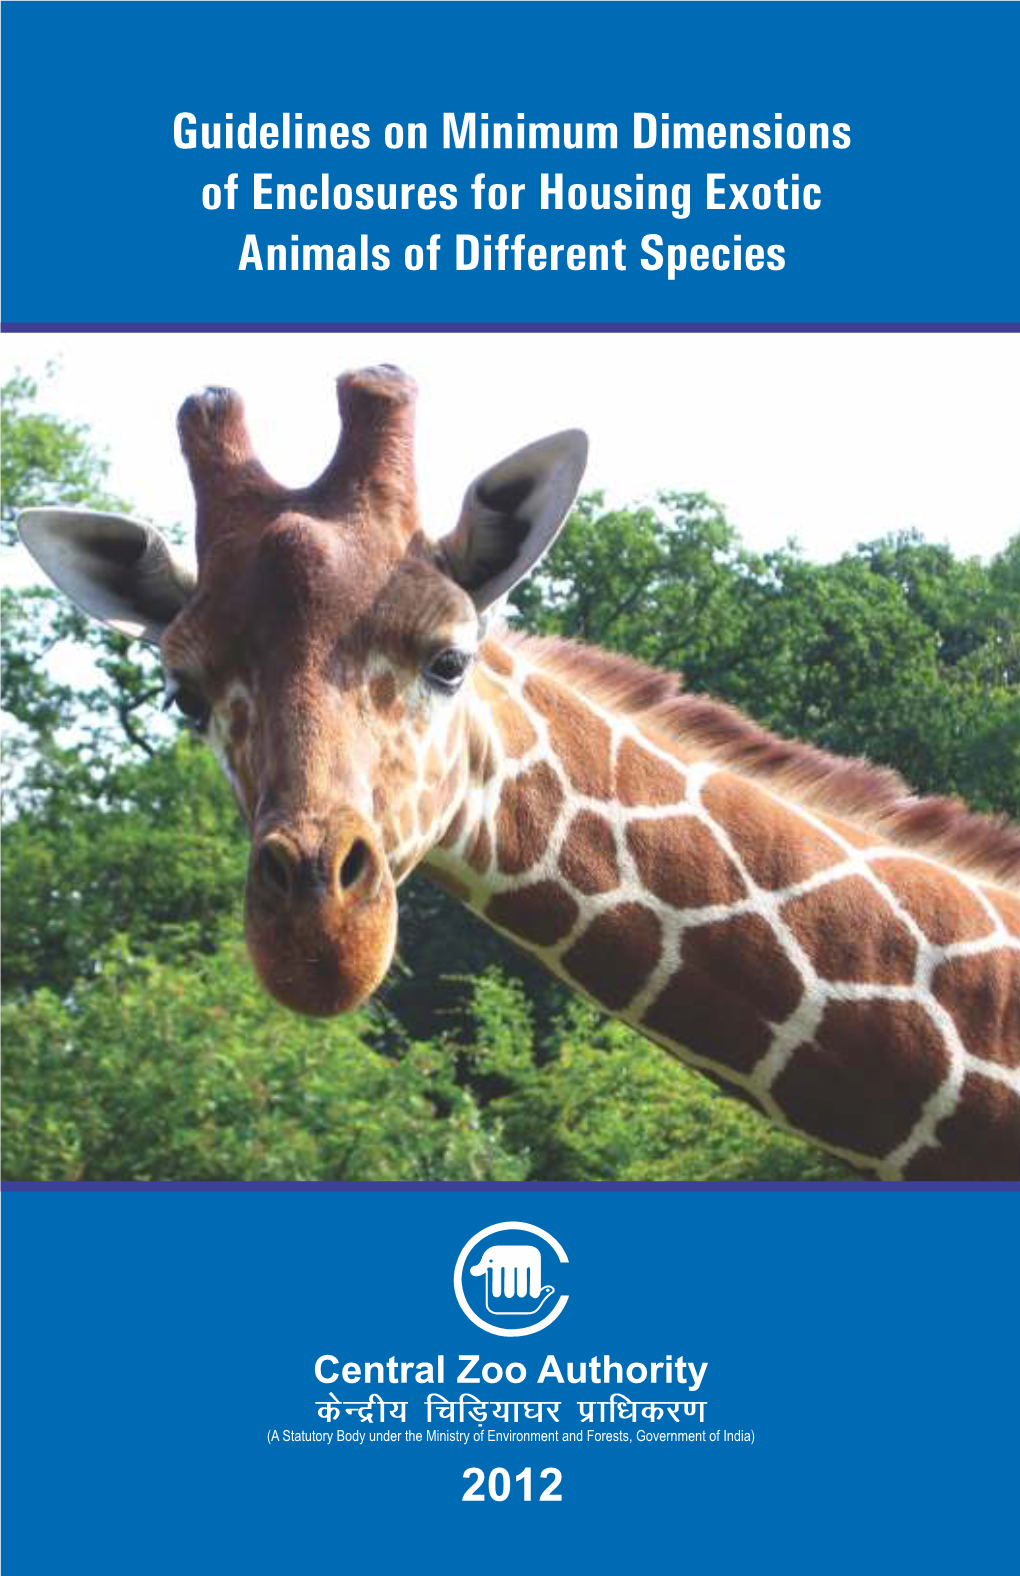 Guidelines on Minimum Dimensions of Enclosures for Housing Exotic Animals of Different Species